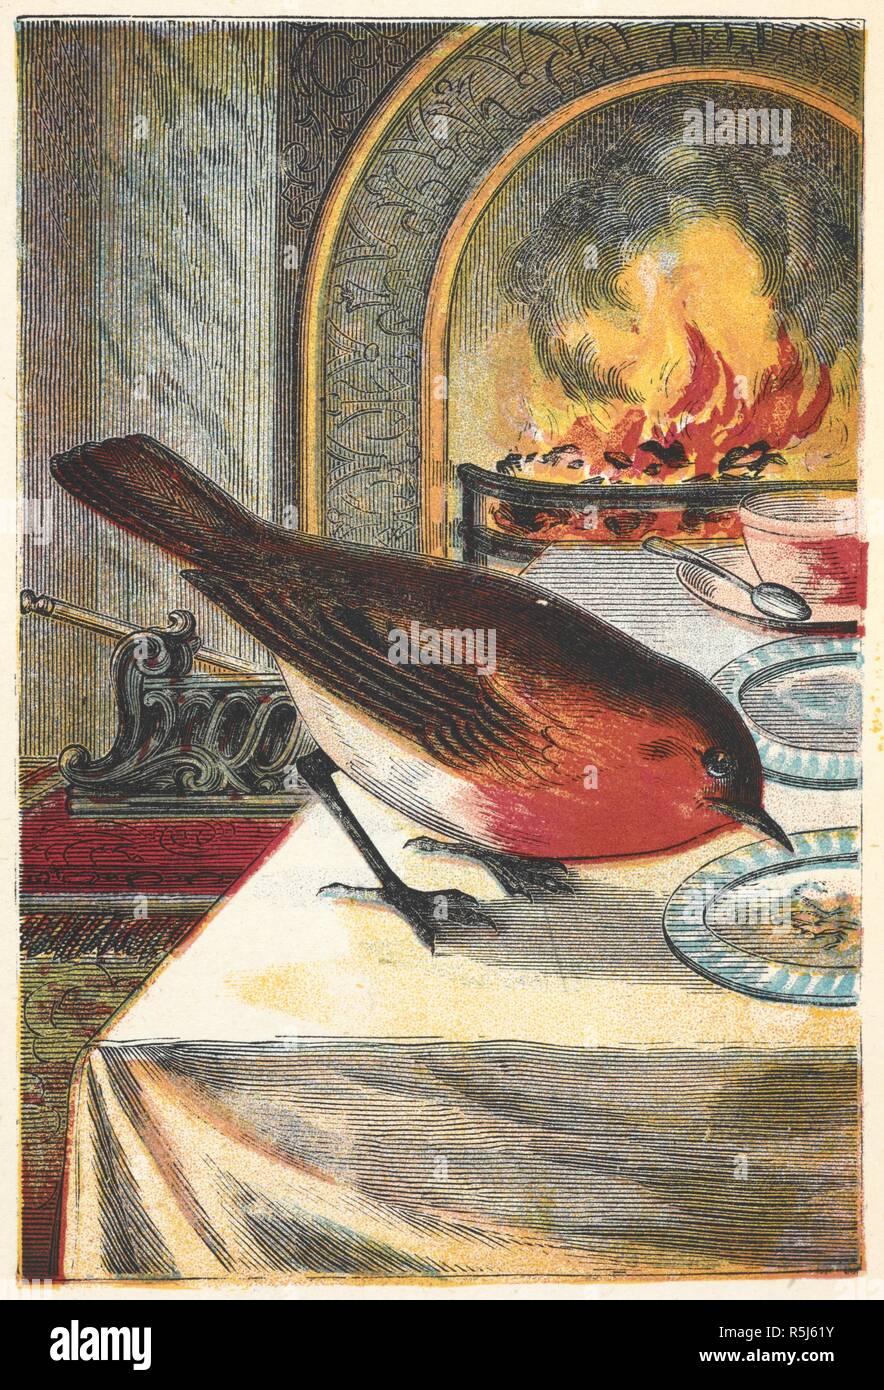 A robin eating from a table in front of a fire. The Robin Redbreast Picture Book. With ... illustrations. London ; New York, [1873]. Source: 12803.aaa.62. plate 8. Author: ANON. Stock Photo